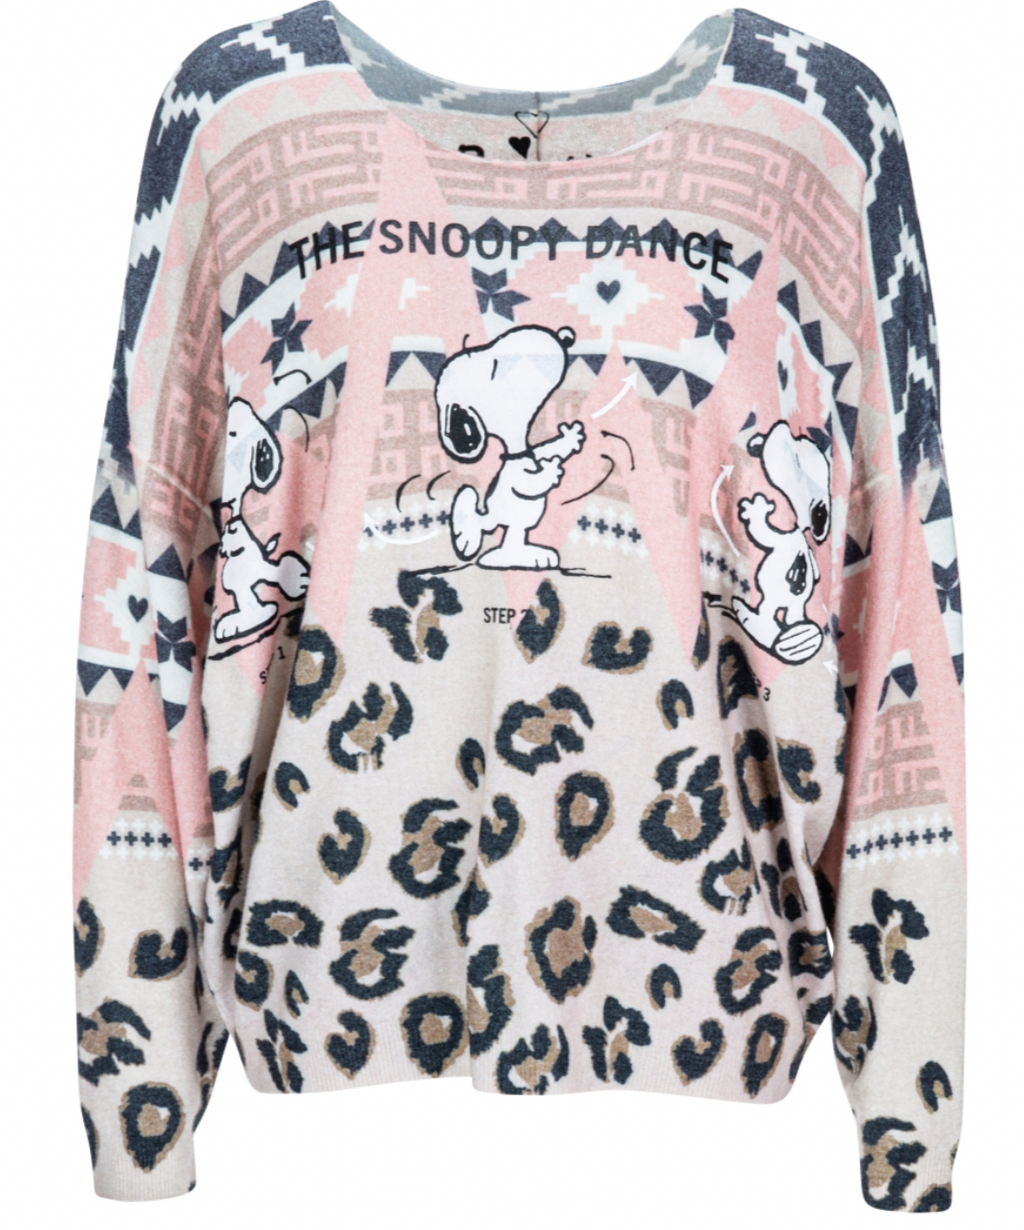 "Dance With Snoopy", Message sweater